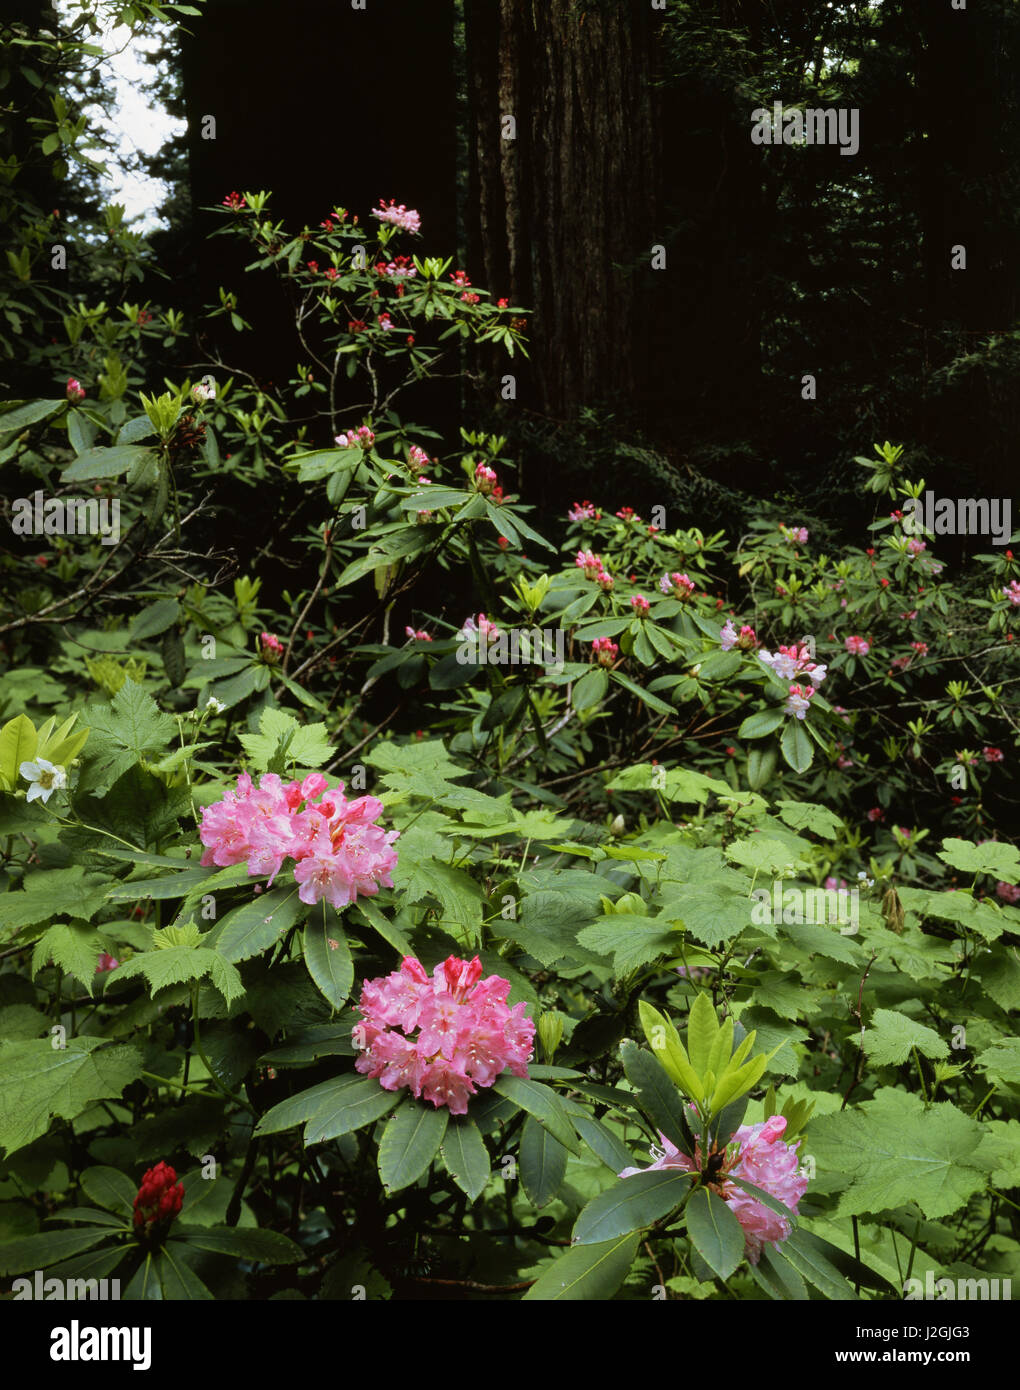 USA, California, Del Norte Coast Redwoods State Park, Rhododendron Flowers in an old growth redwood forest. (Large format sizes available) Stock Photo